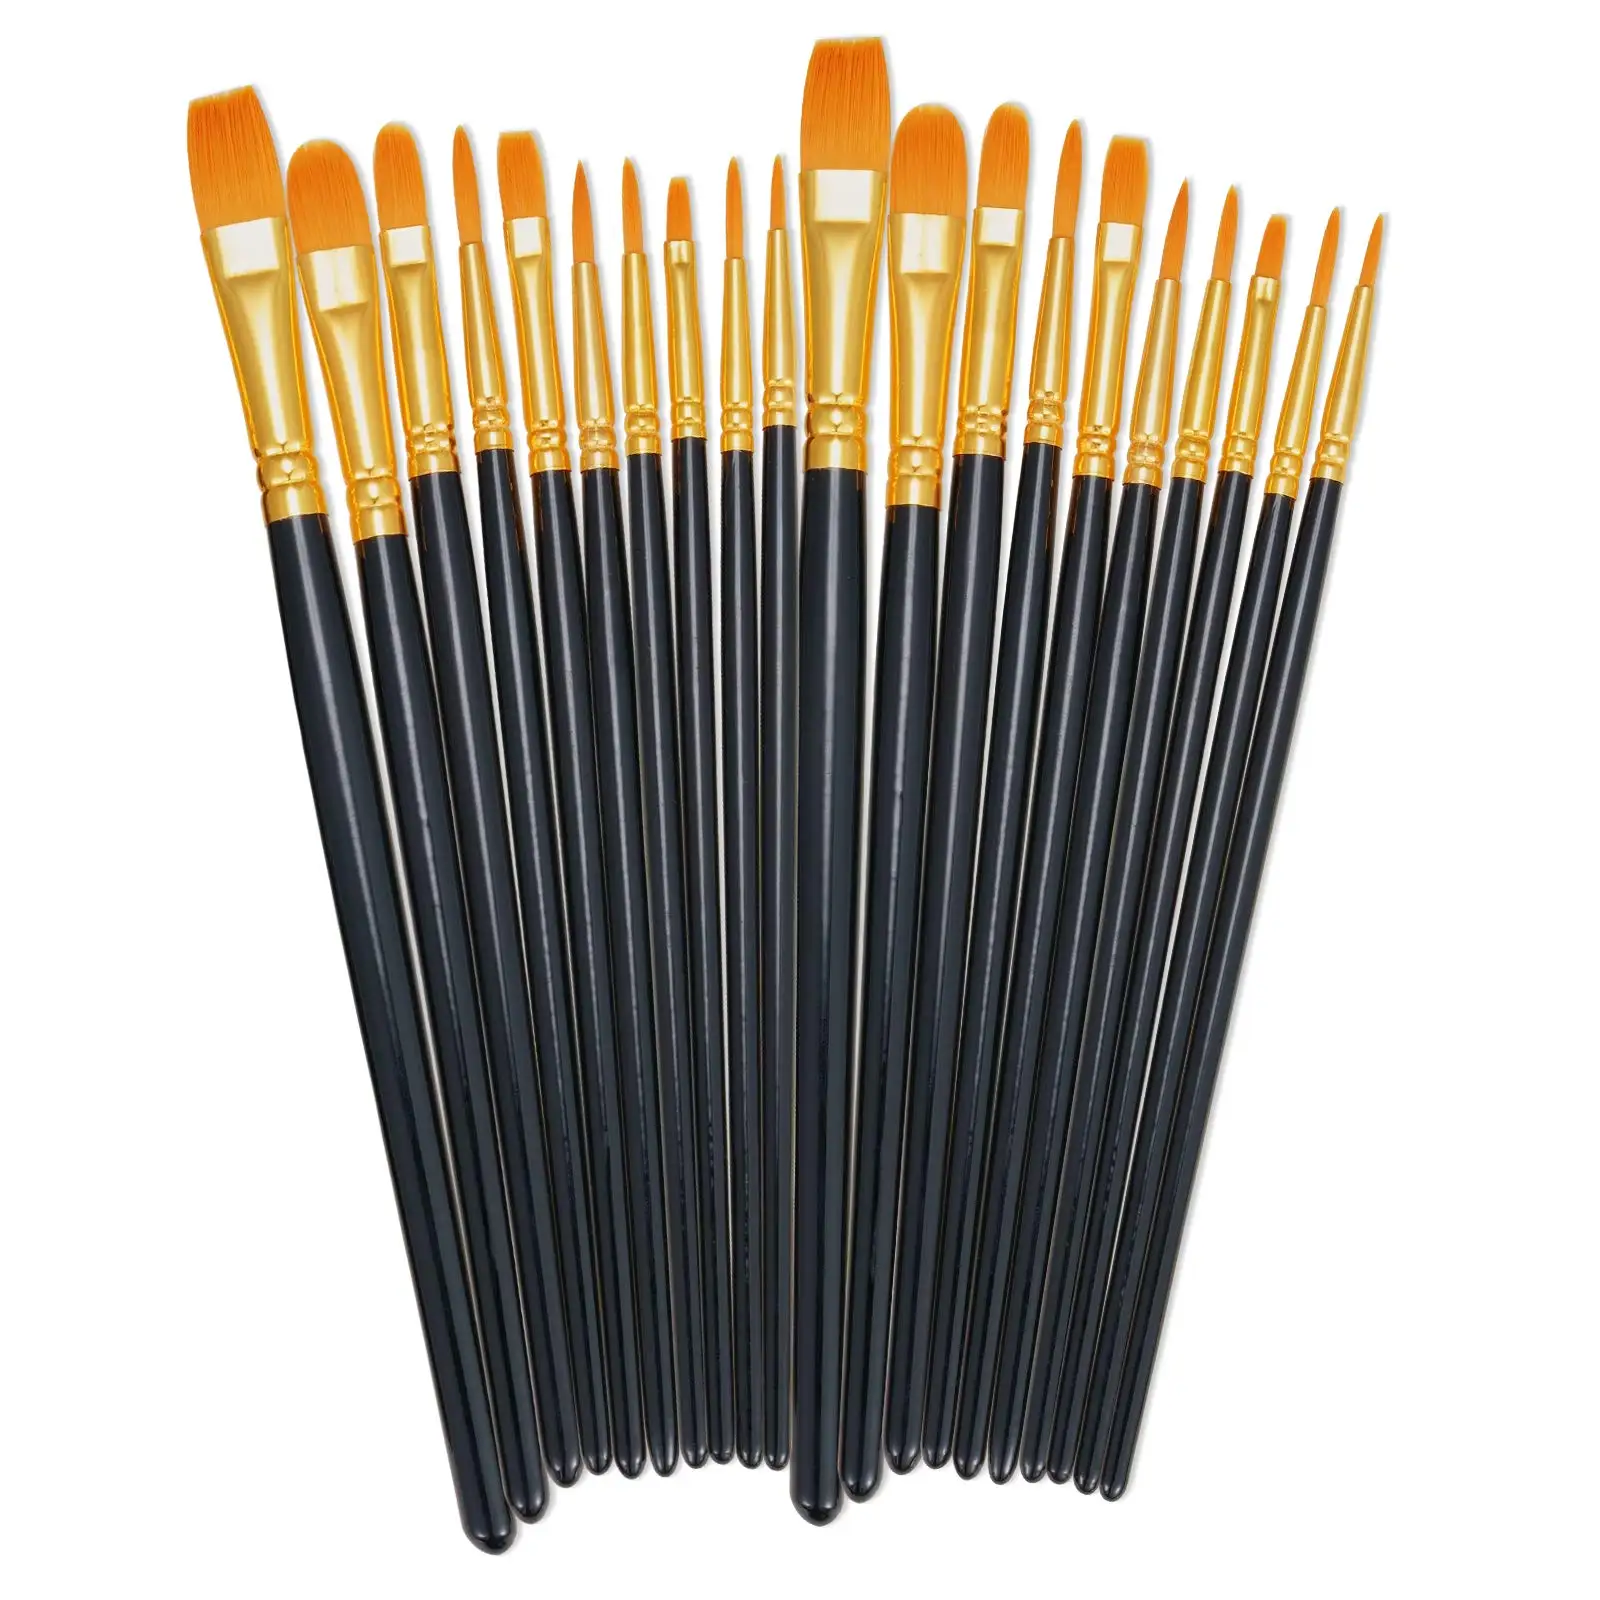 Cheap Paint Brushes From Professional Factory - China Painting